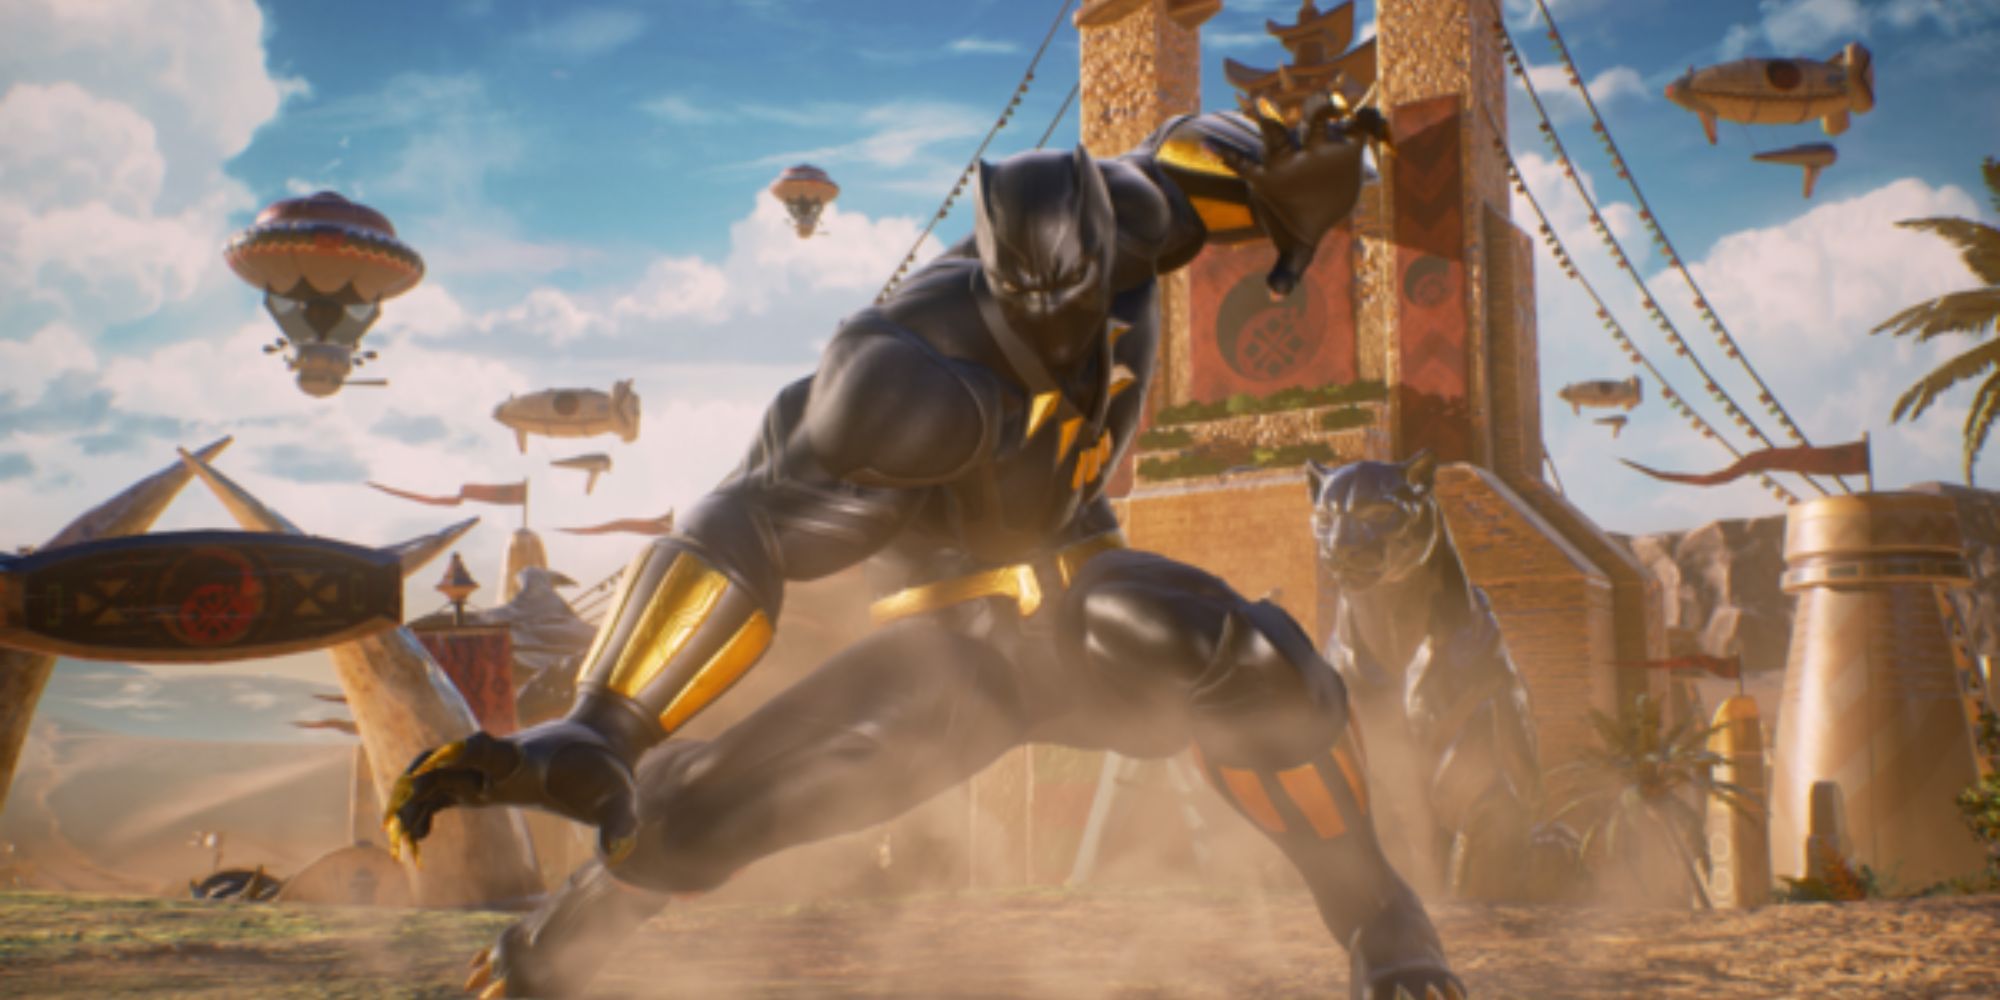 Black Panther prepares to attack by a building in the desert